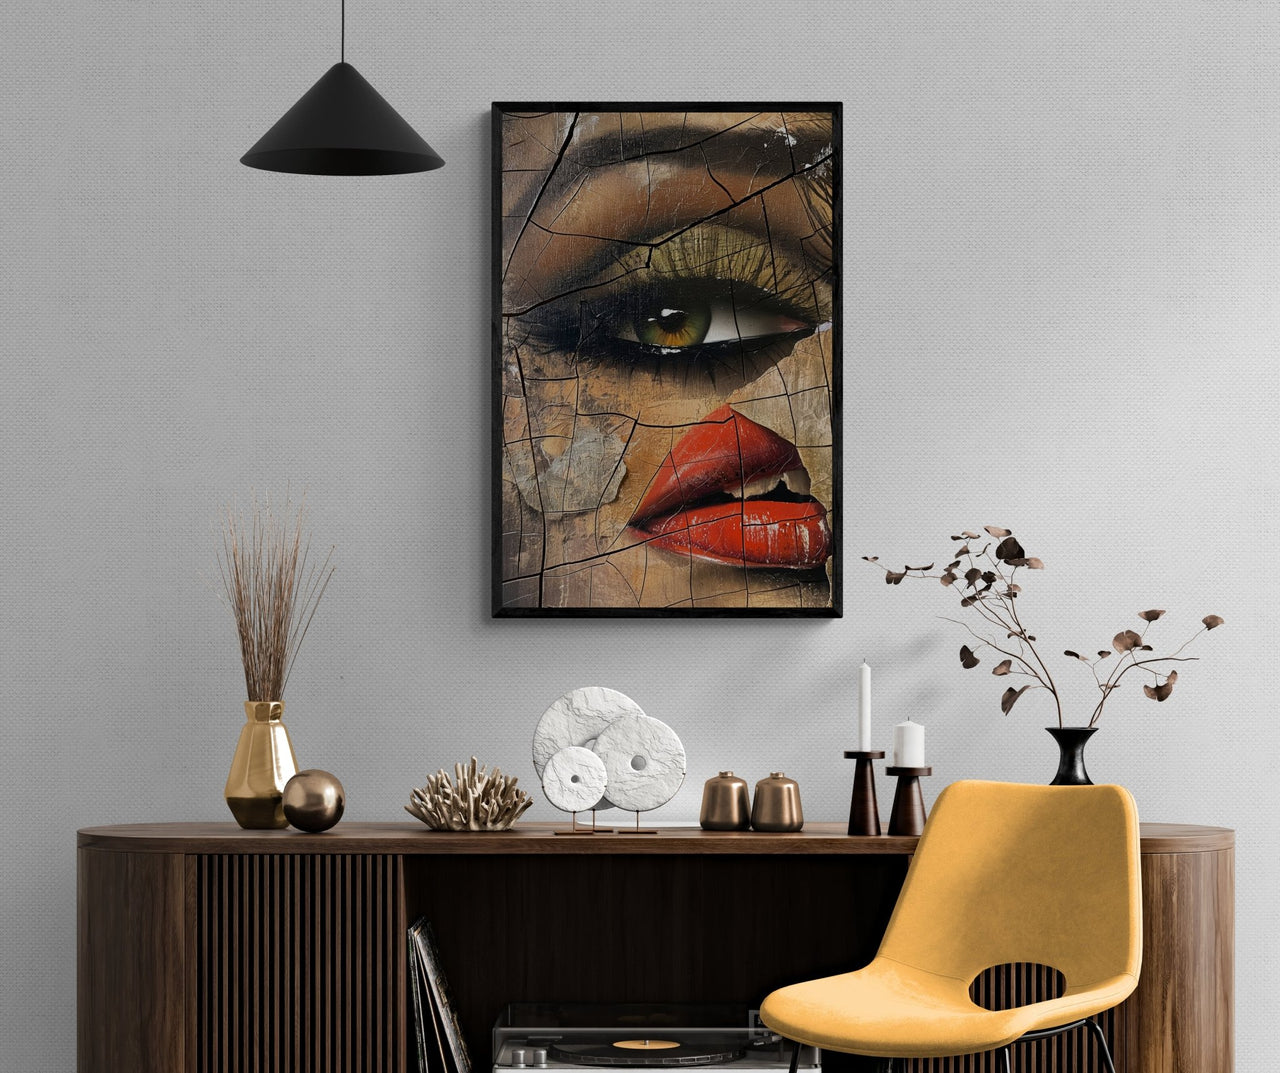 Intriguing framed canvas print from Milton Wes Art, depicting an up-close, textured portrayal of a woman's eye and lips, set in a chic room with modern decor, available at miltonwesart.com, Harlem NYC